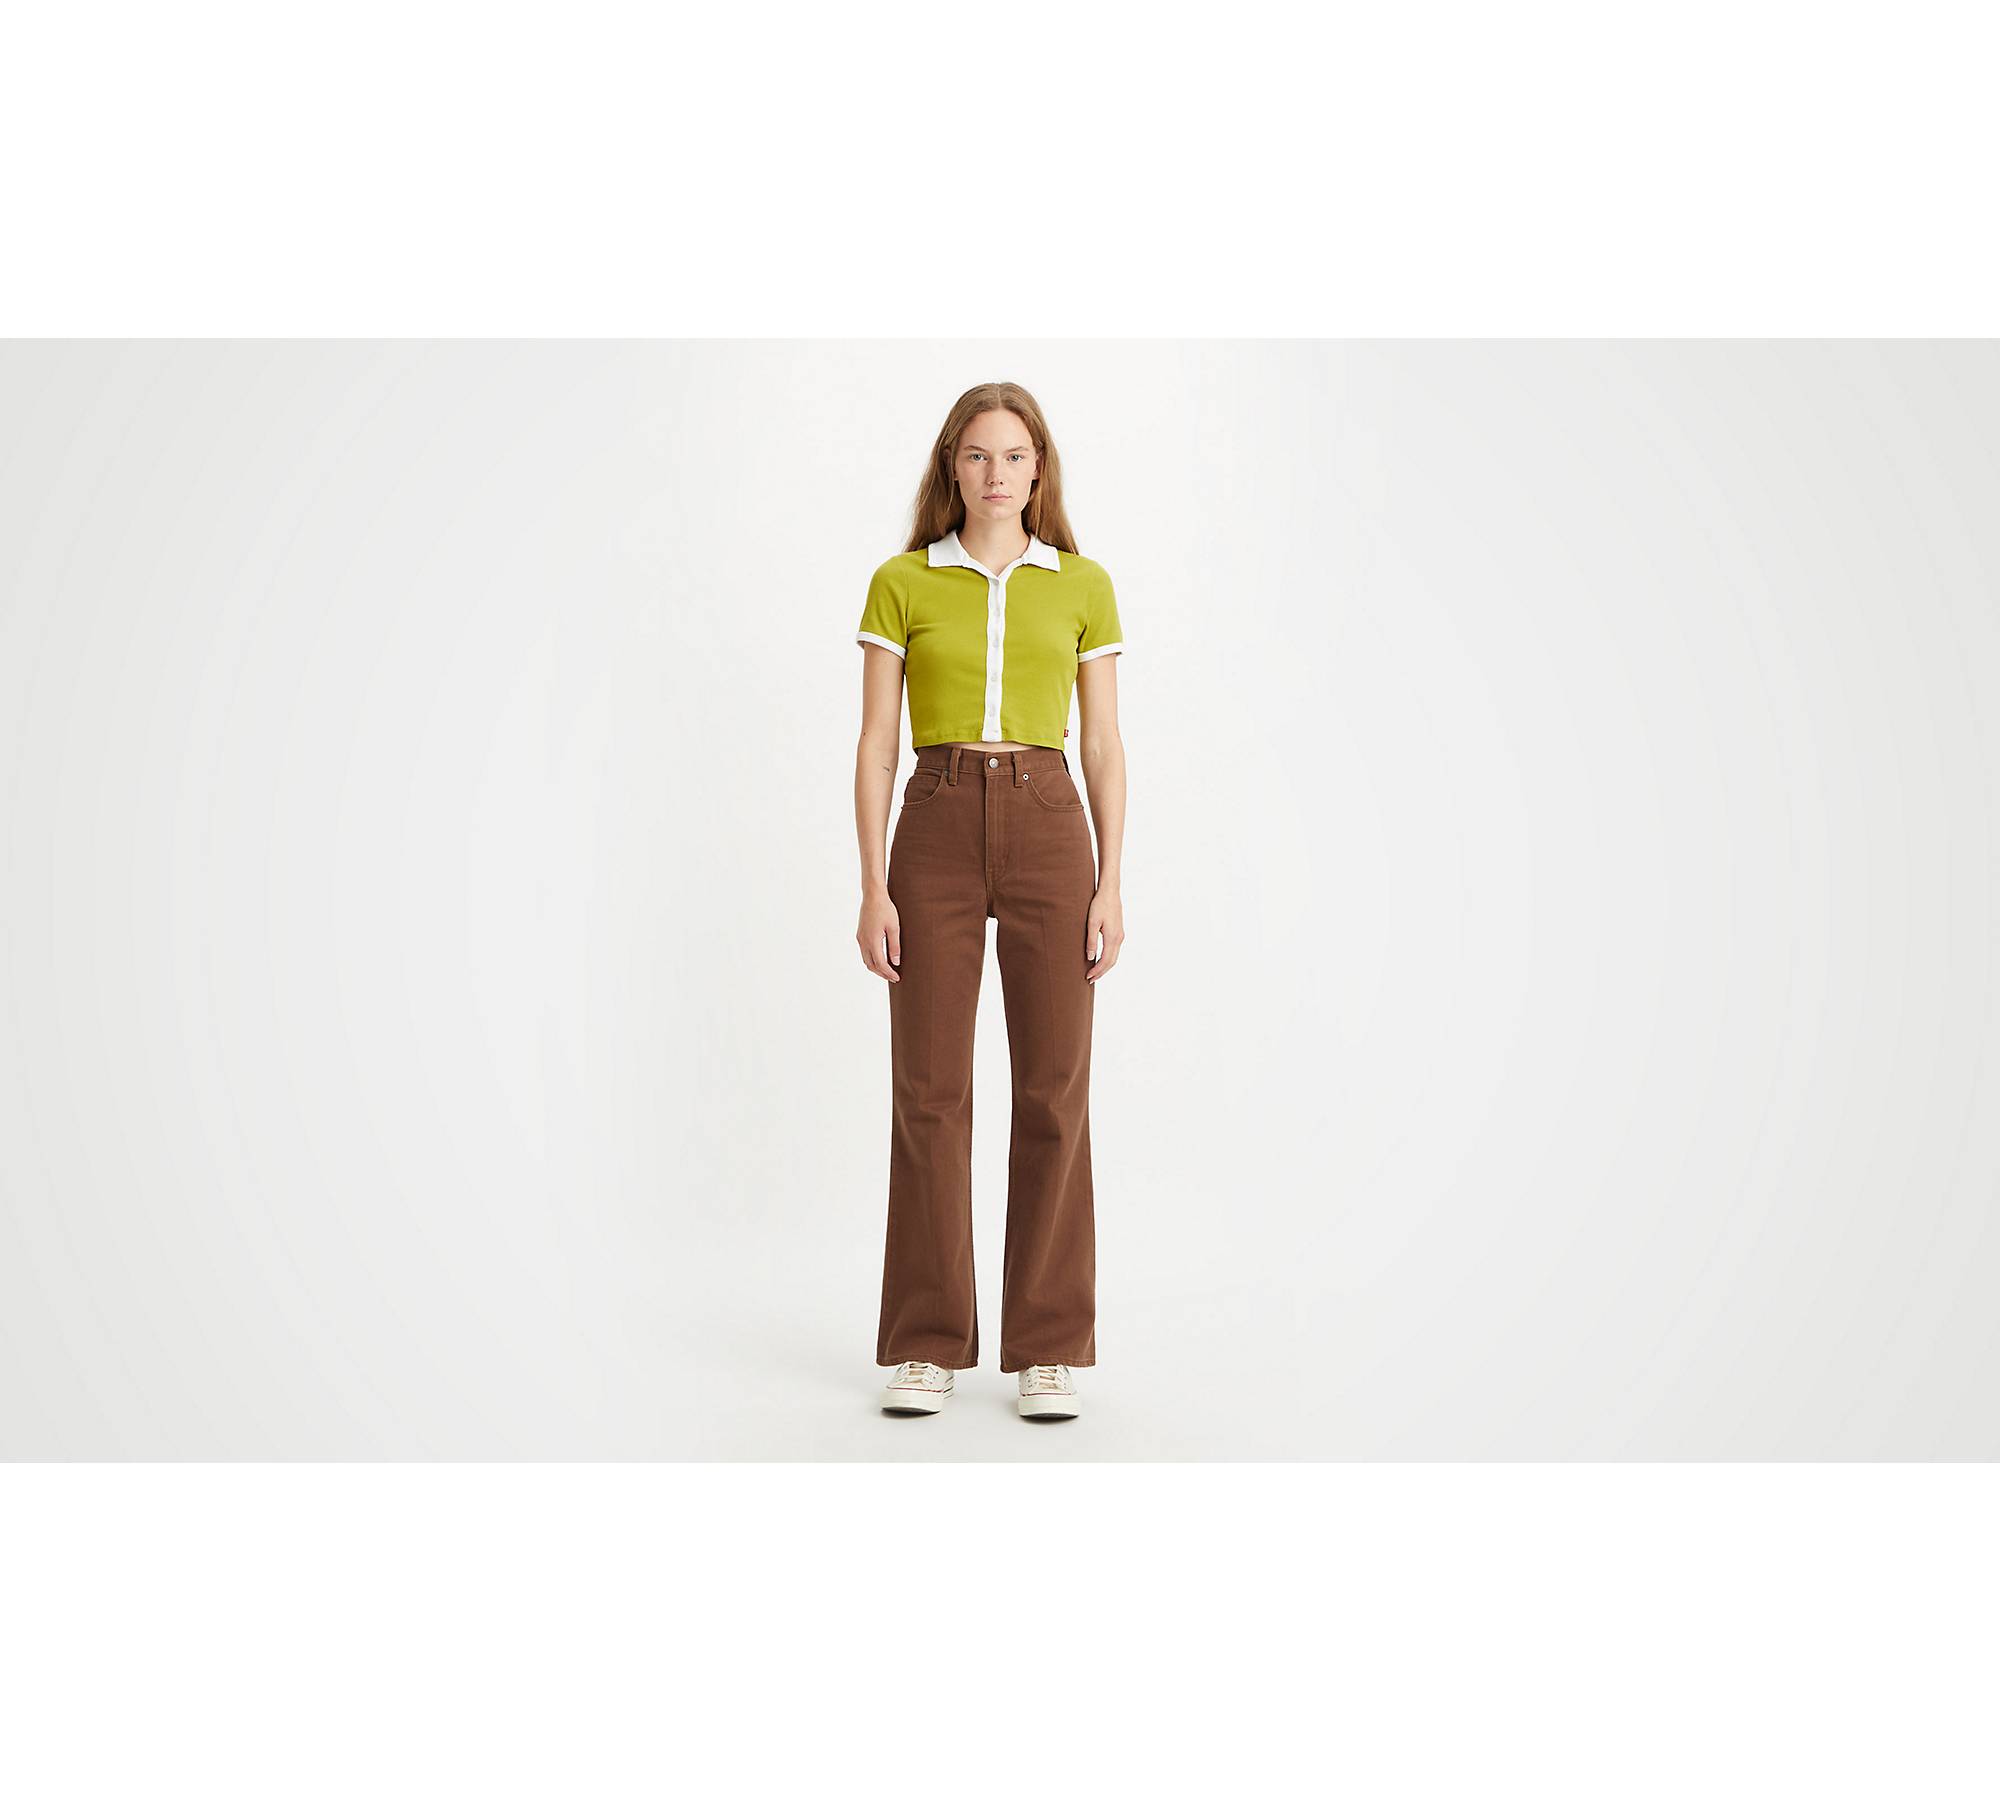 corduroy flare jeans outfit｜TikTok Search